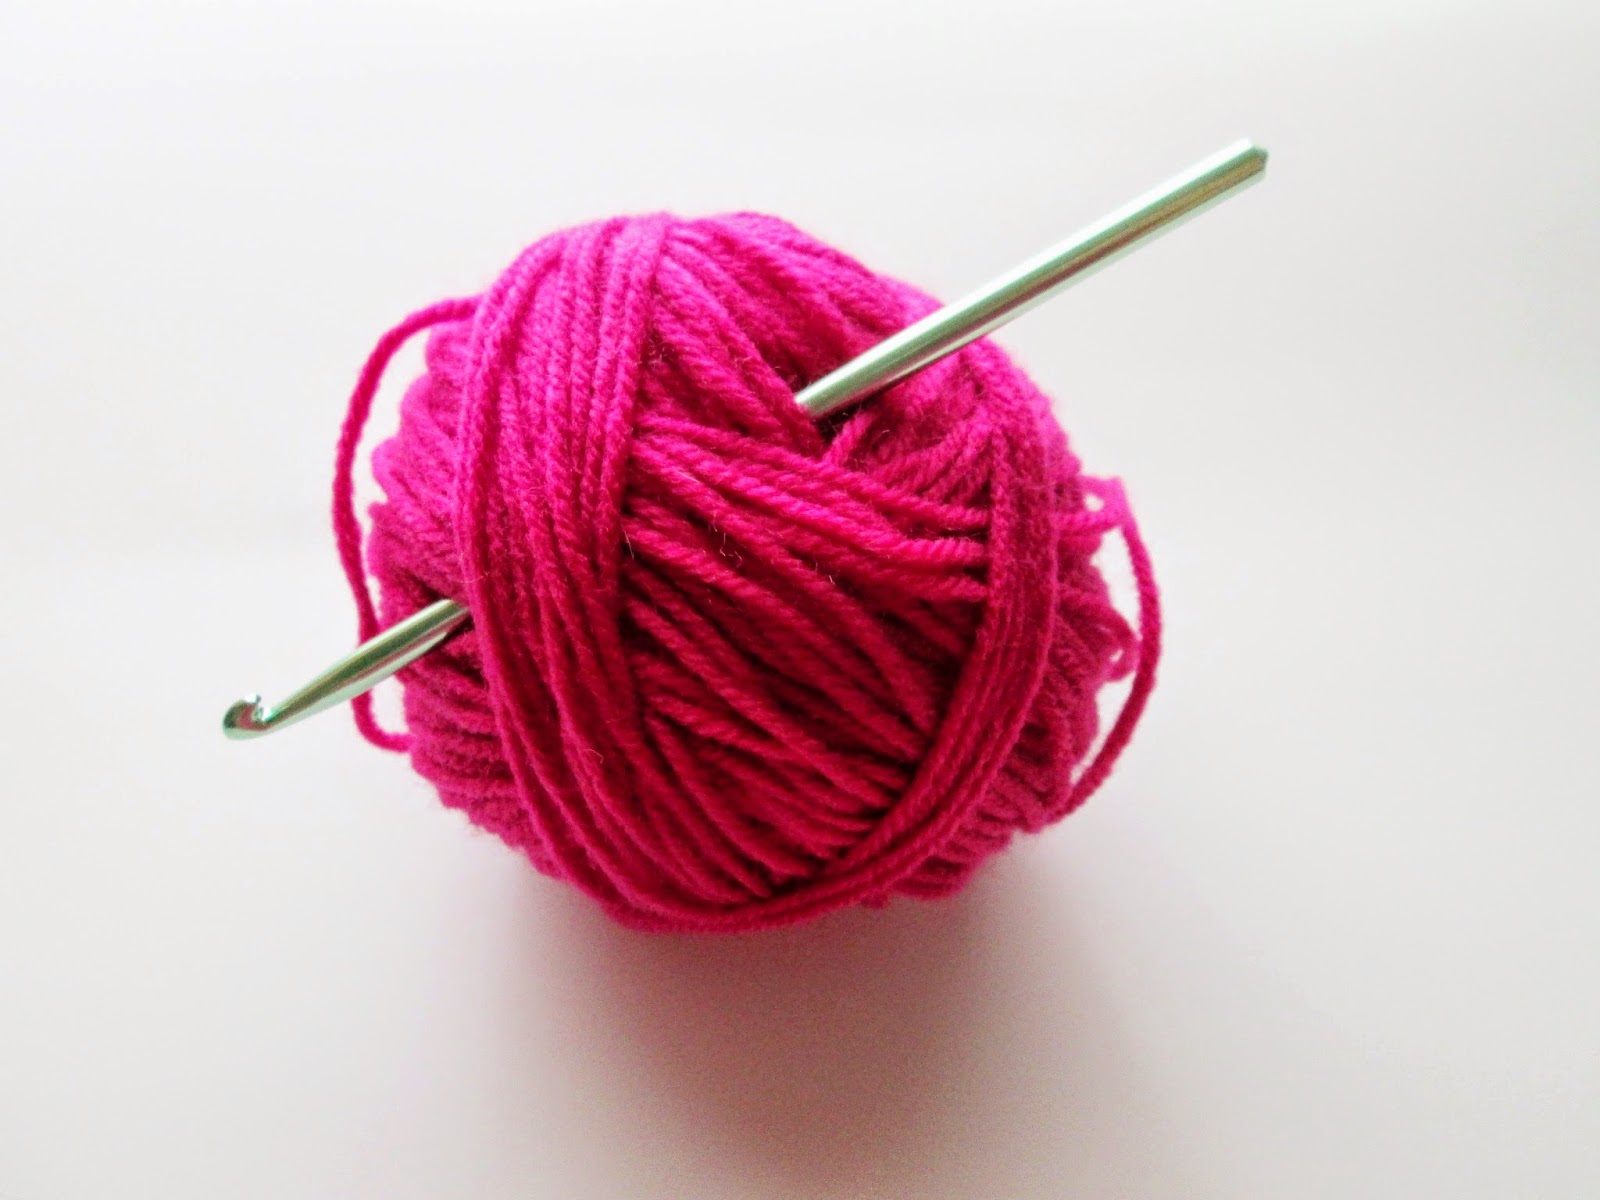 By Haniyyah  Free Clipart   Ball Of Yarn And Crochet Hook Or Needle